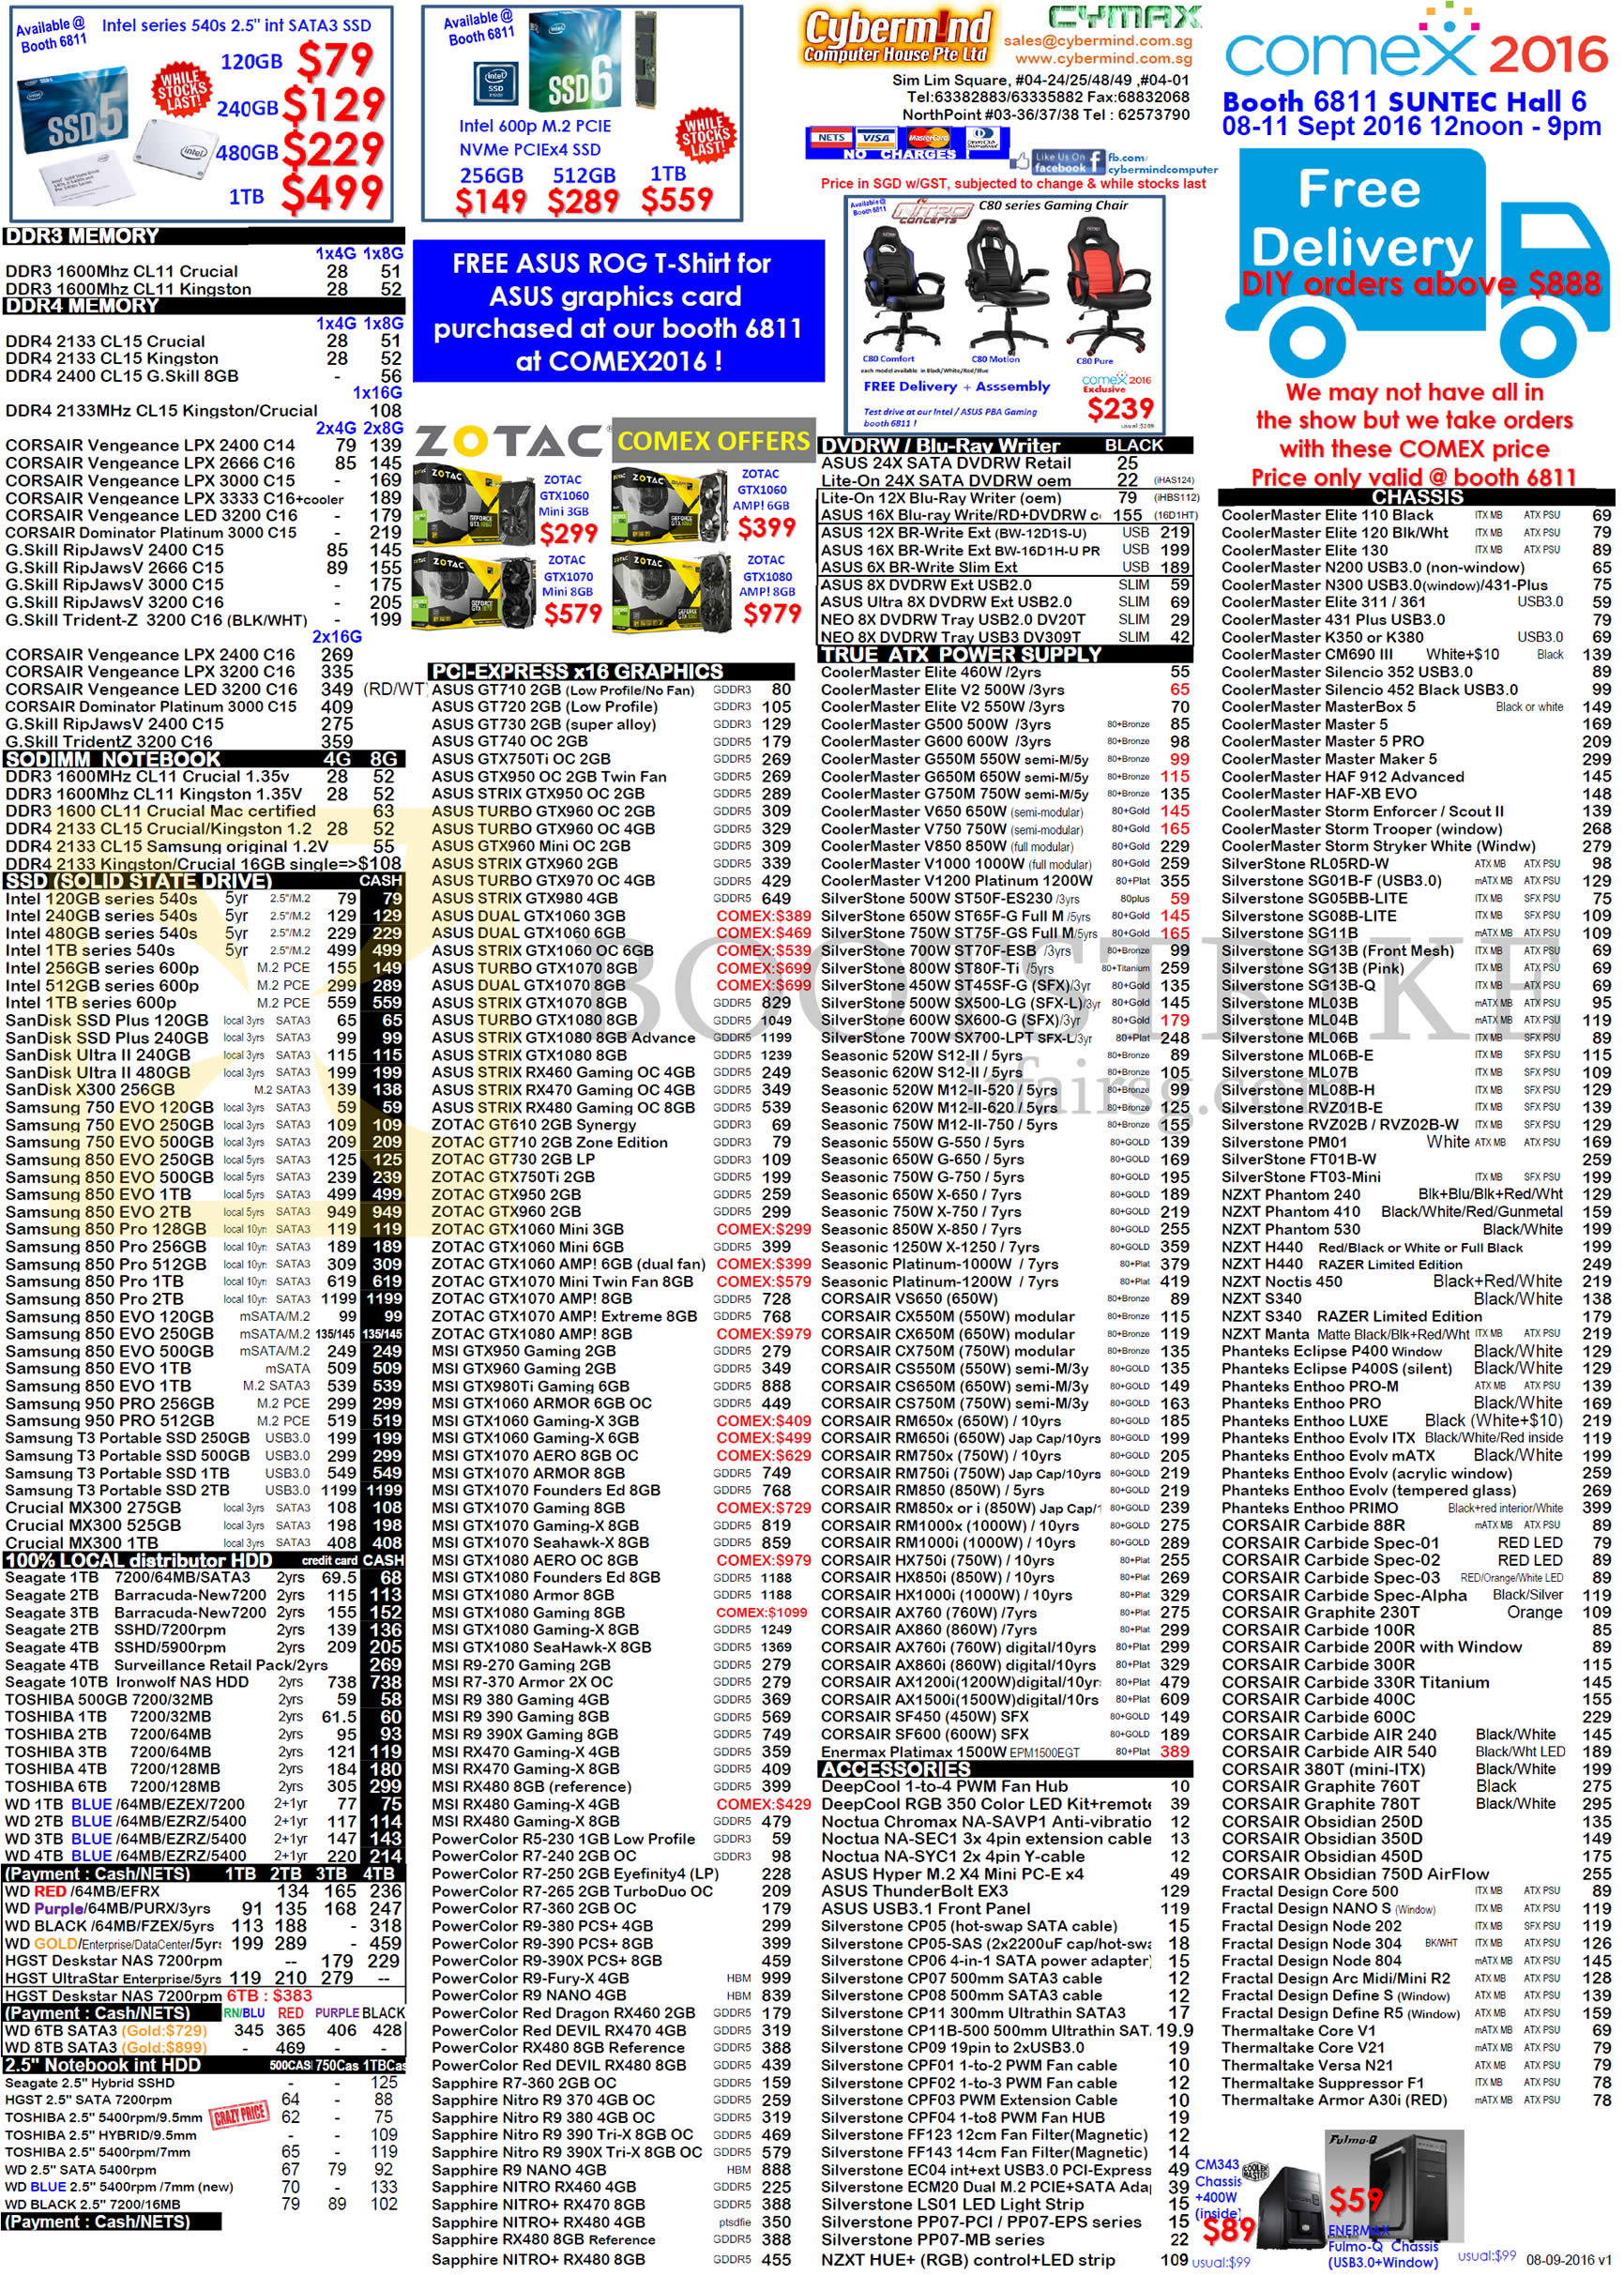 COMEX 2016 price list image brochure of Cybermind DDR3, DDR4 Memory, Notebooks, SSDs, HDDs, DVD RW, Power Supply, Accessories, Seagate, Corsair, Samsung, SanDisk, WD, Toshiba